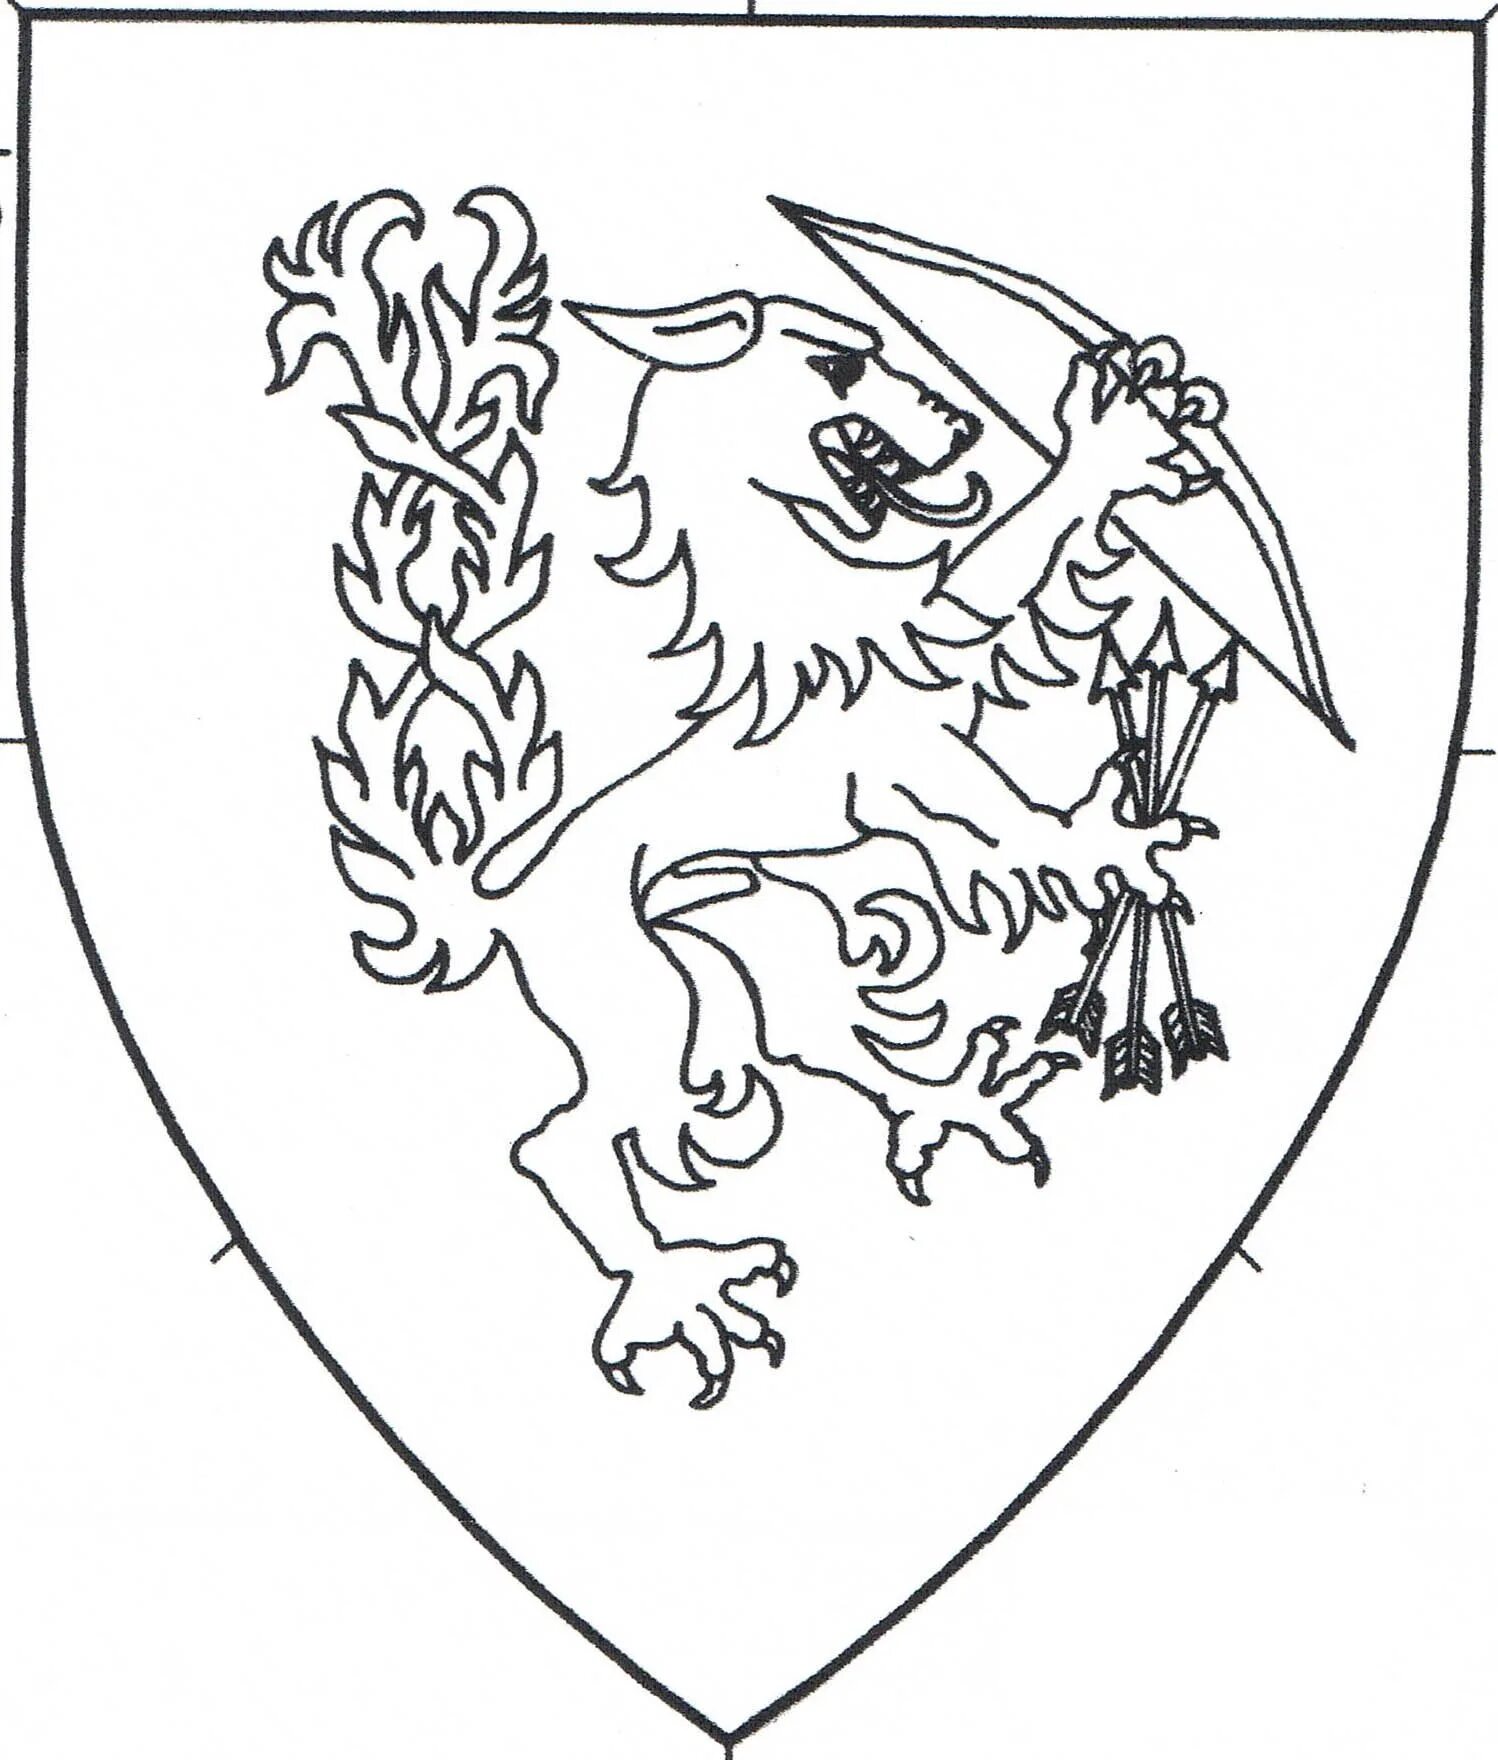 Knight's coat of arms #8